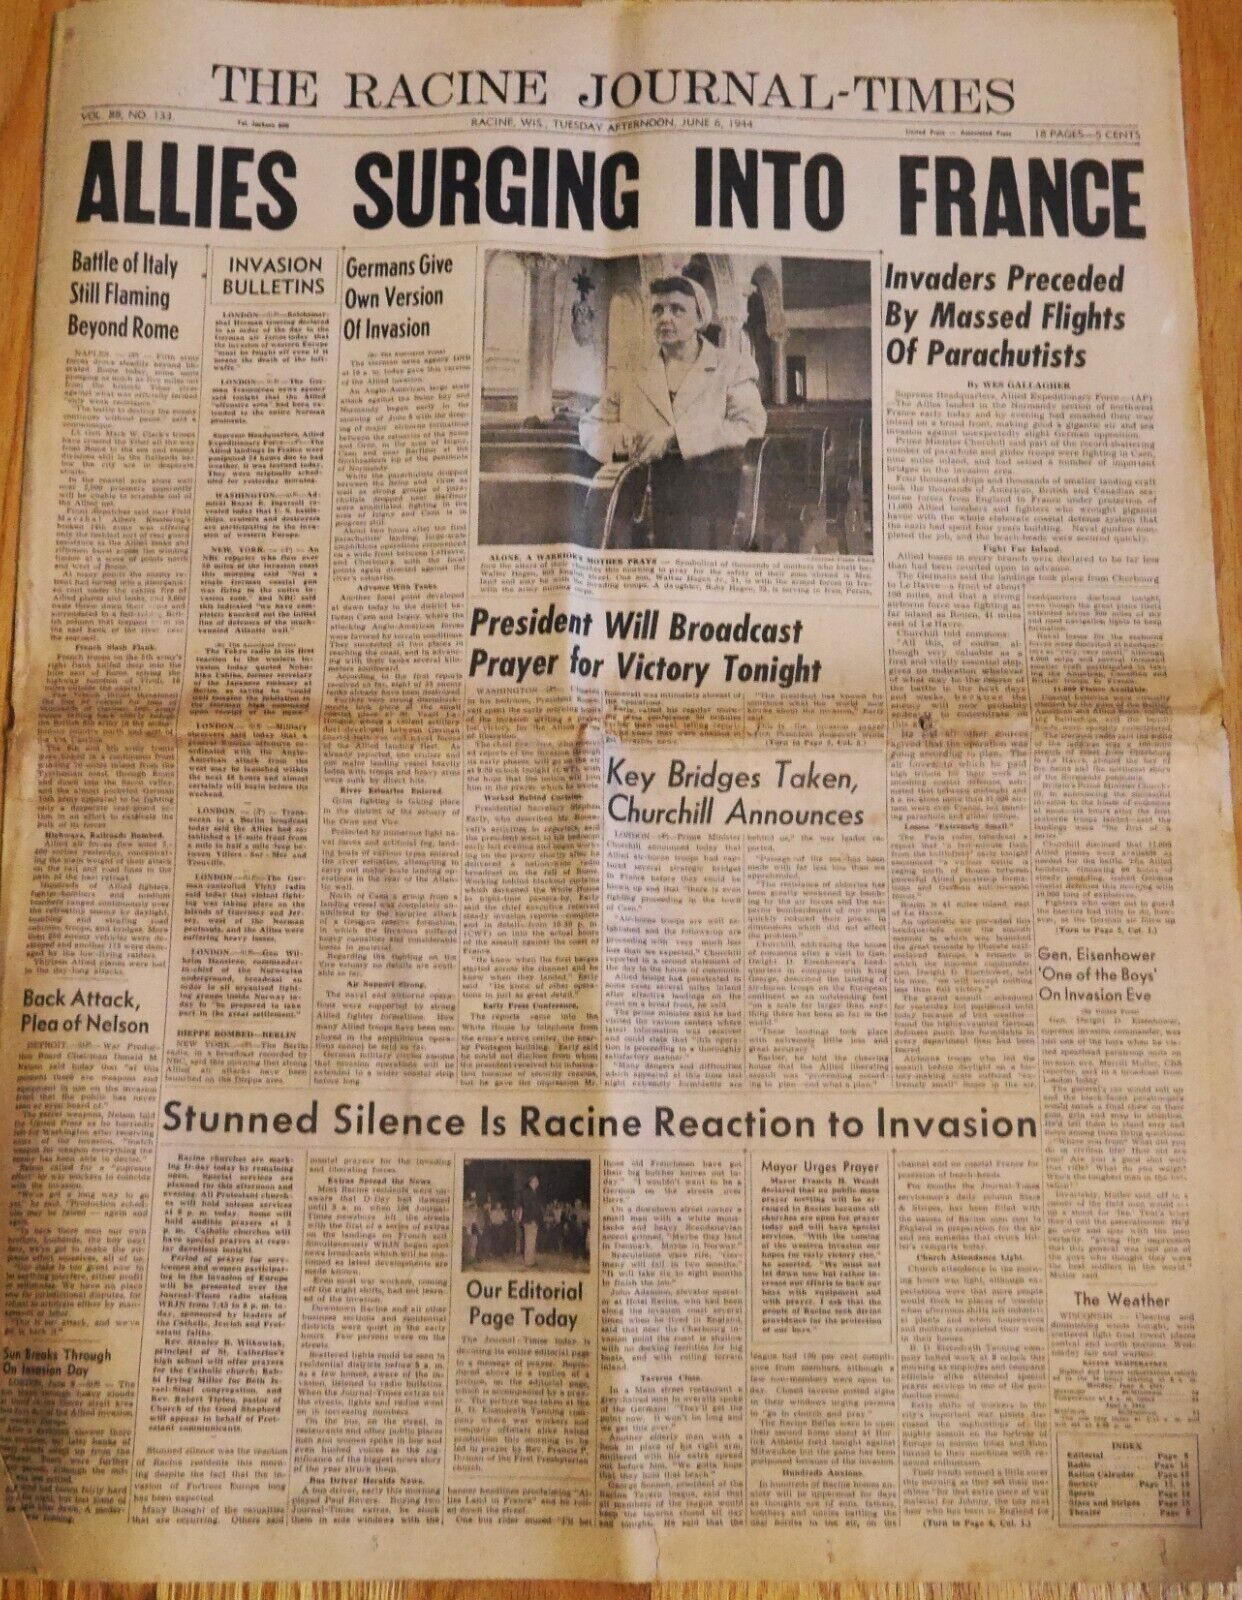 1944 JUNE 6 Racine Journal Times Allies Surging Into France Vol. 88 No. 133